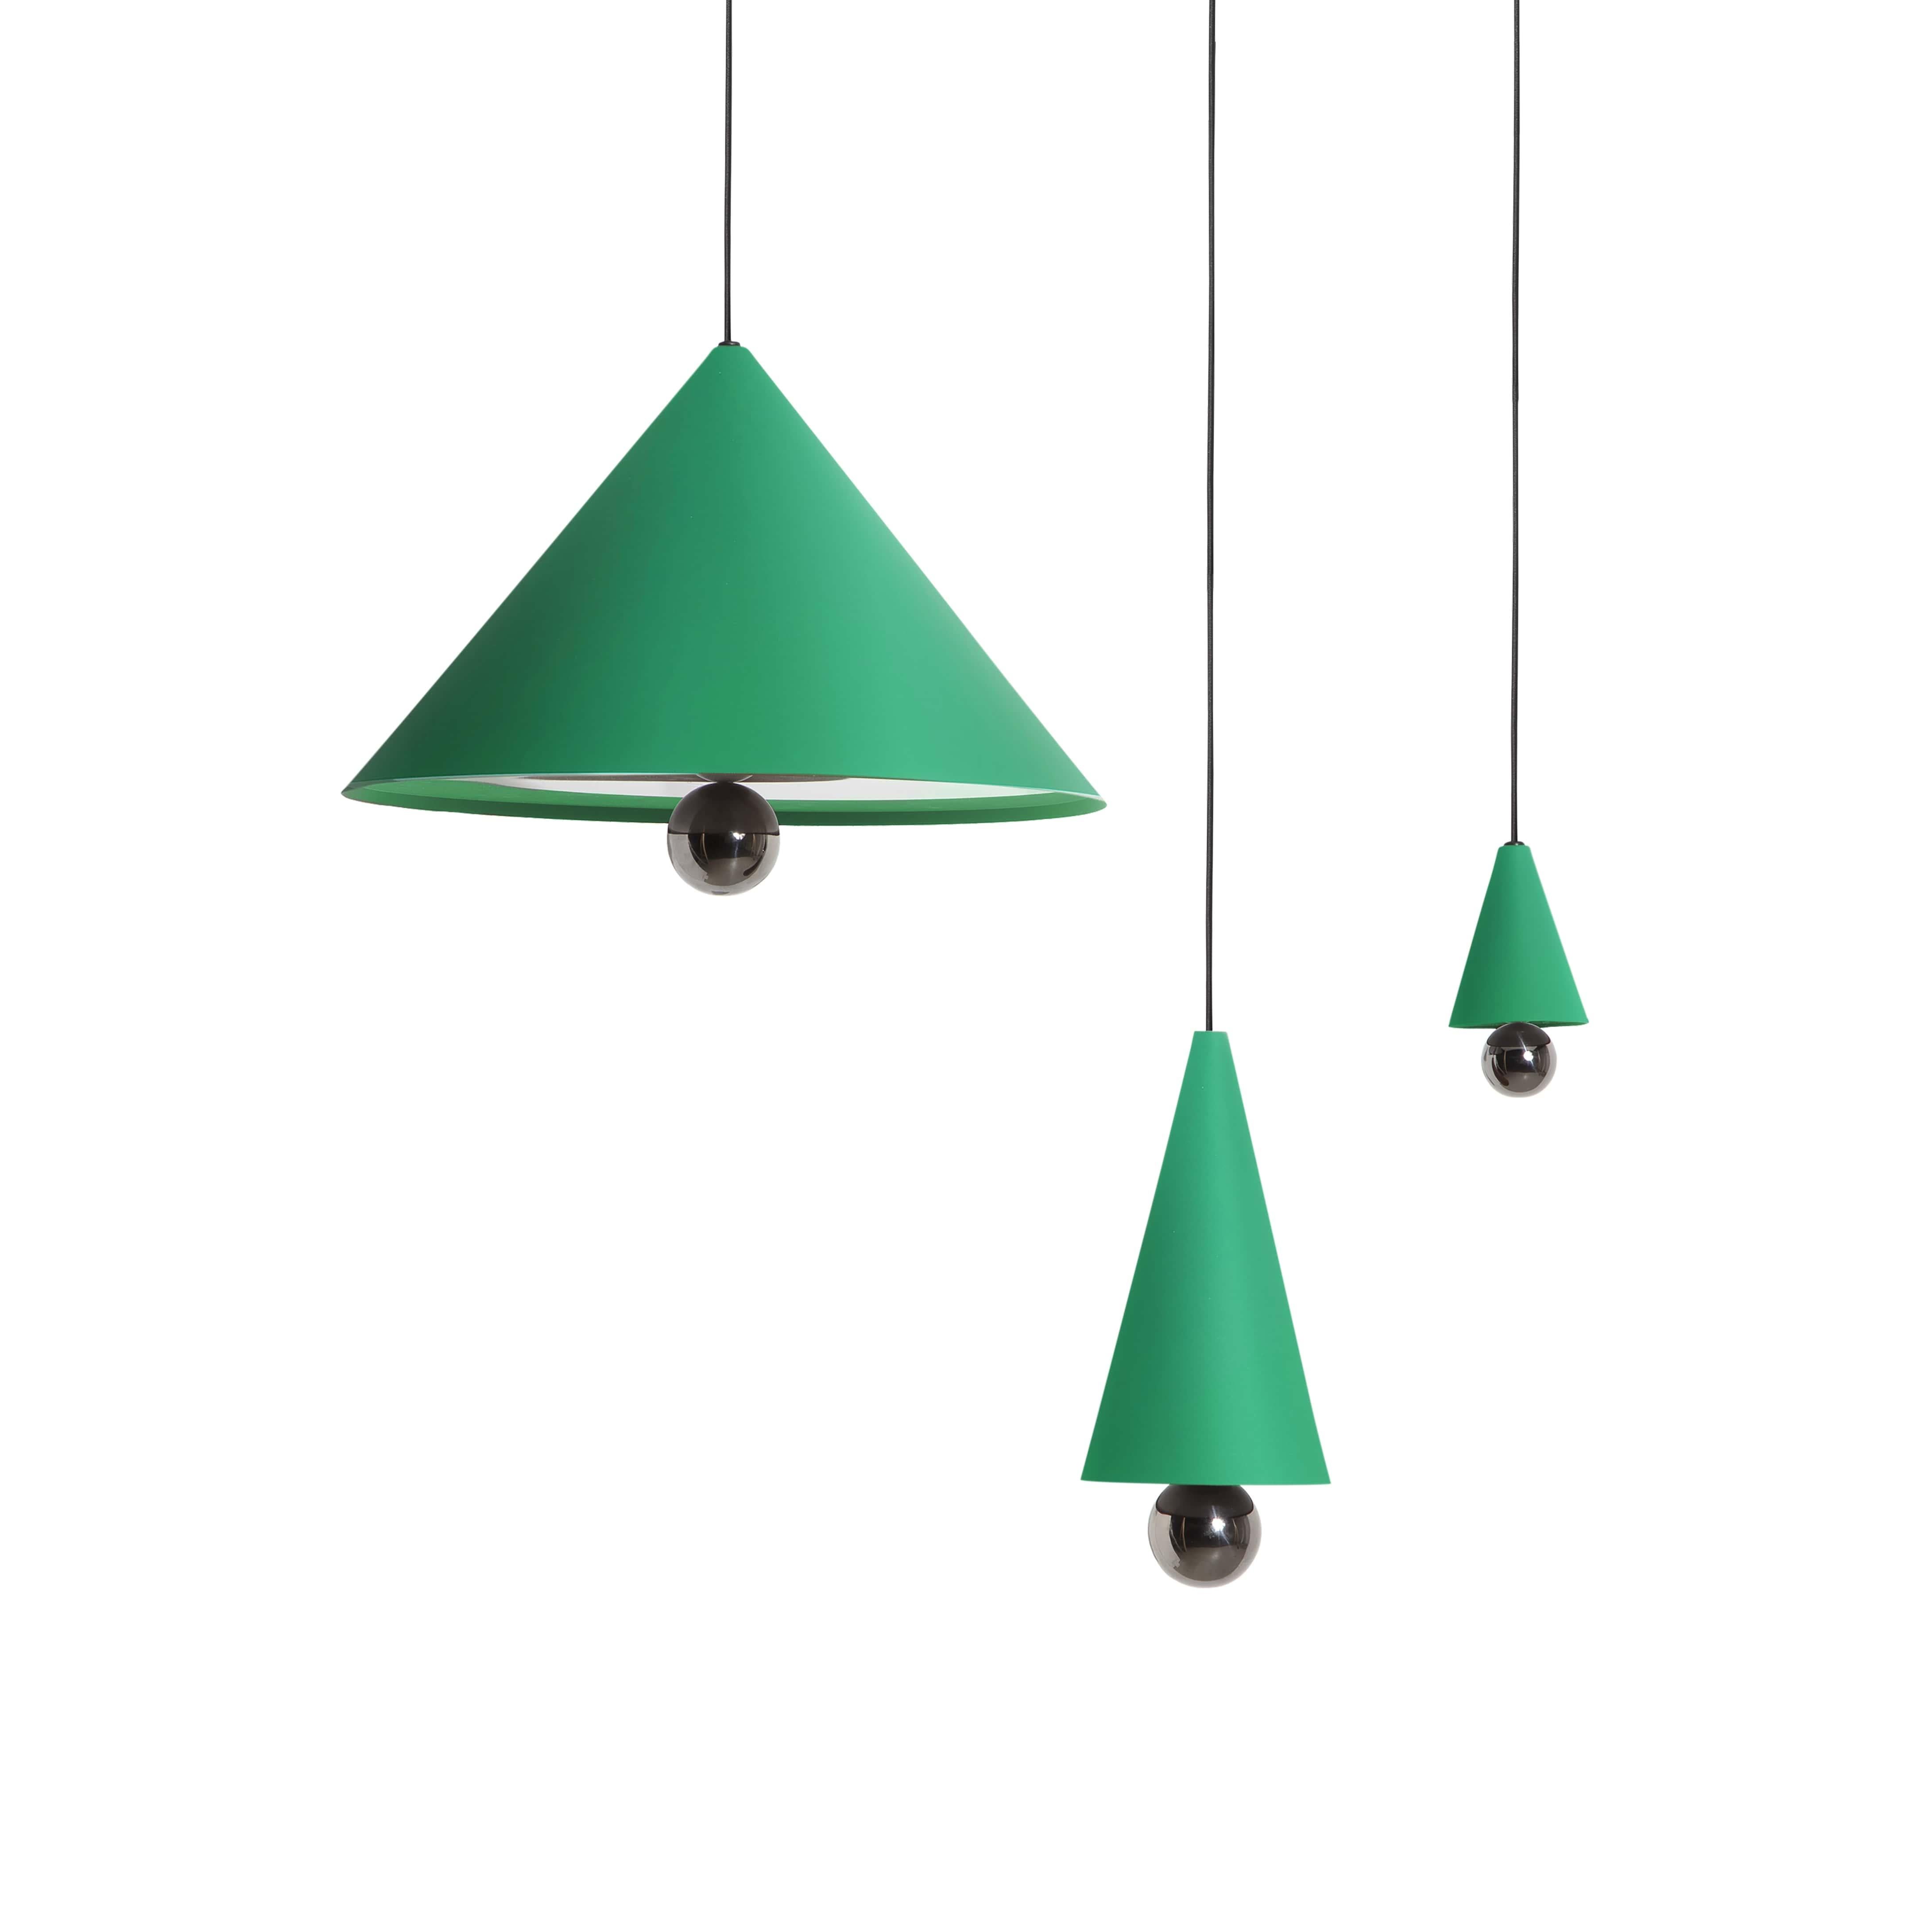 French Petite Friture XS Cherry LED Pendant Light in Mint-Green and Titanium Aluminium For Sale